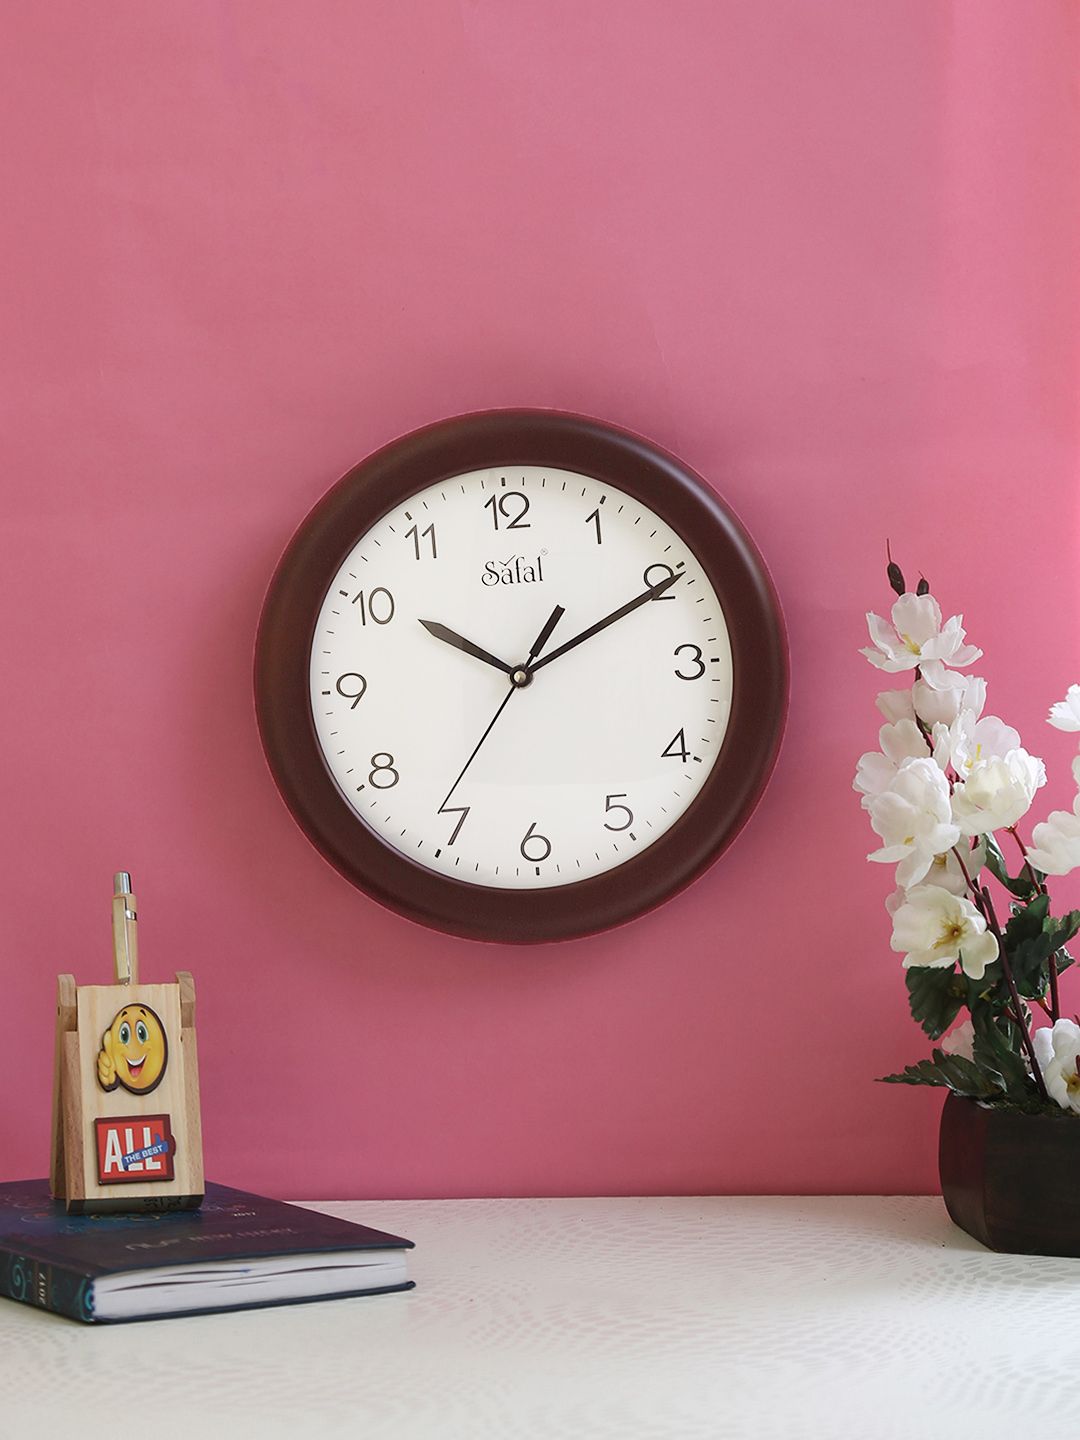 Safal White Dial 23 cm x 23 cm Round Analogue Wall Clock Price in India